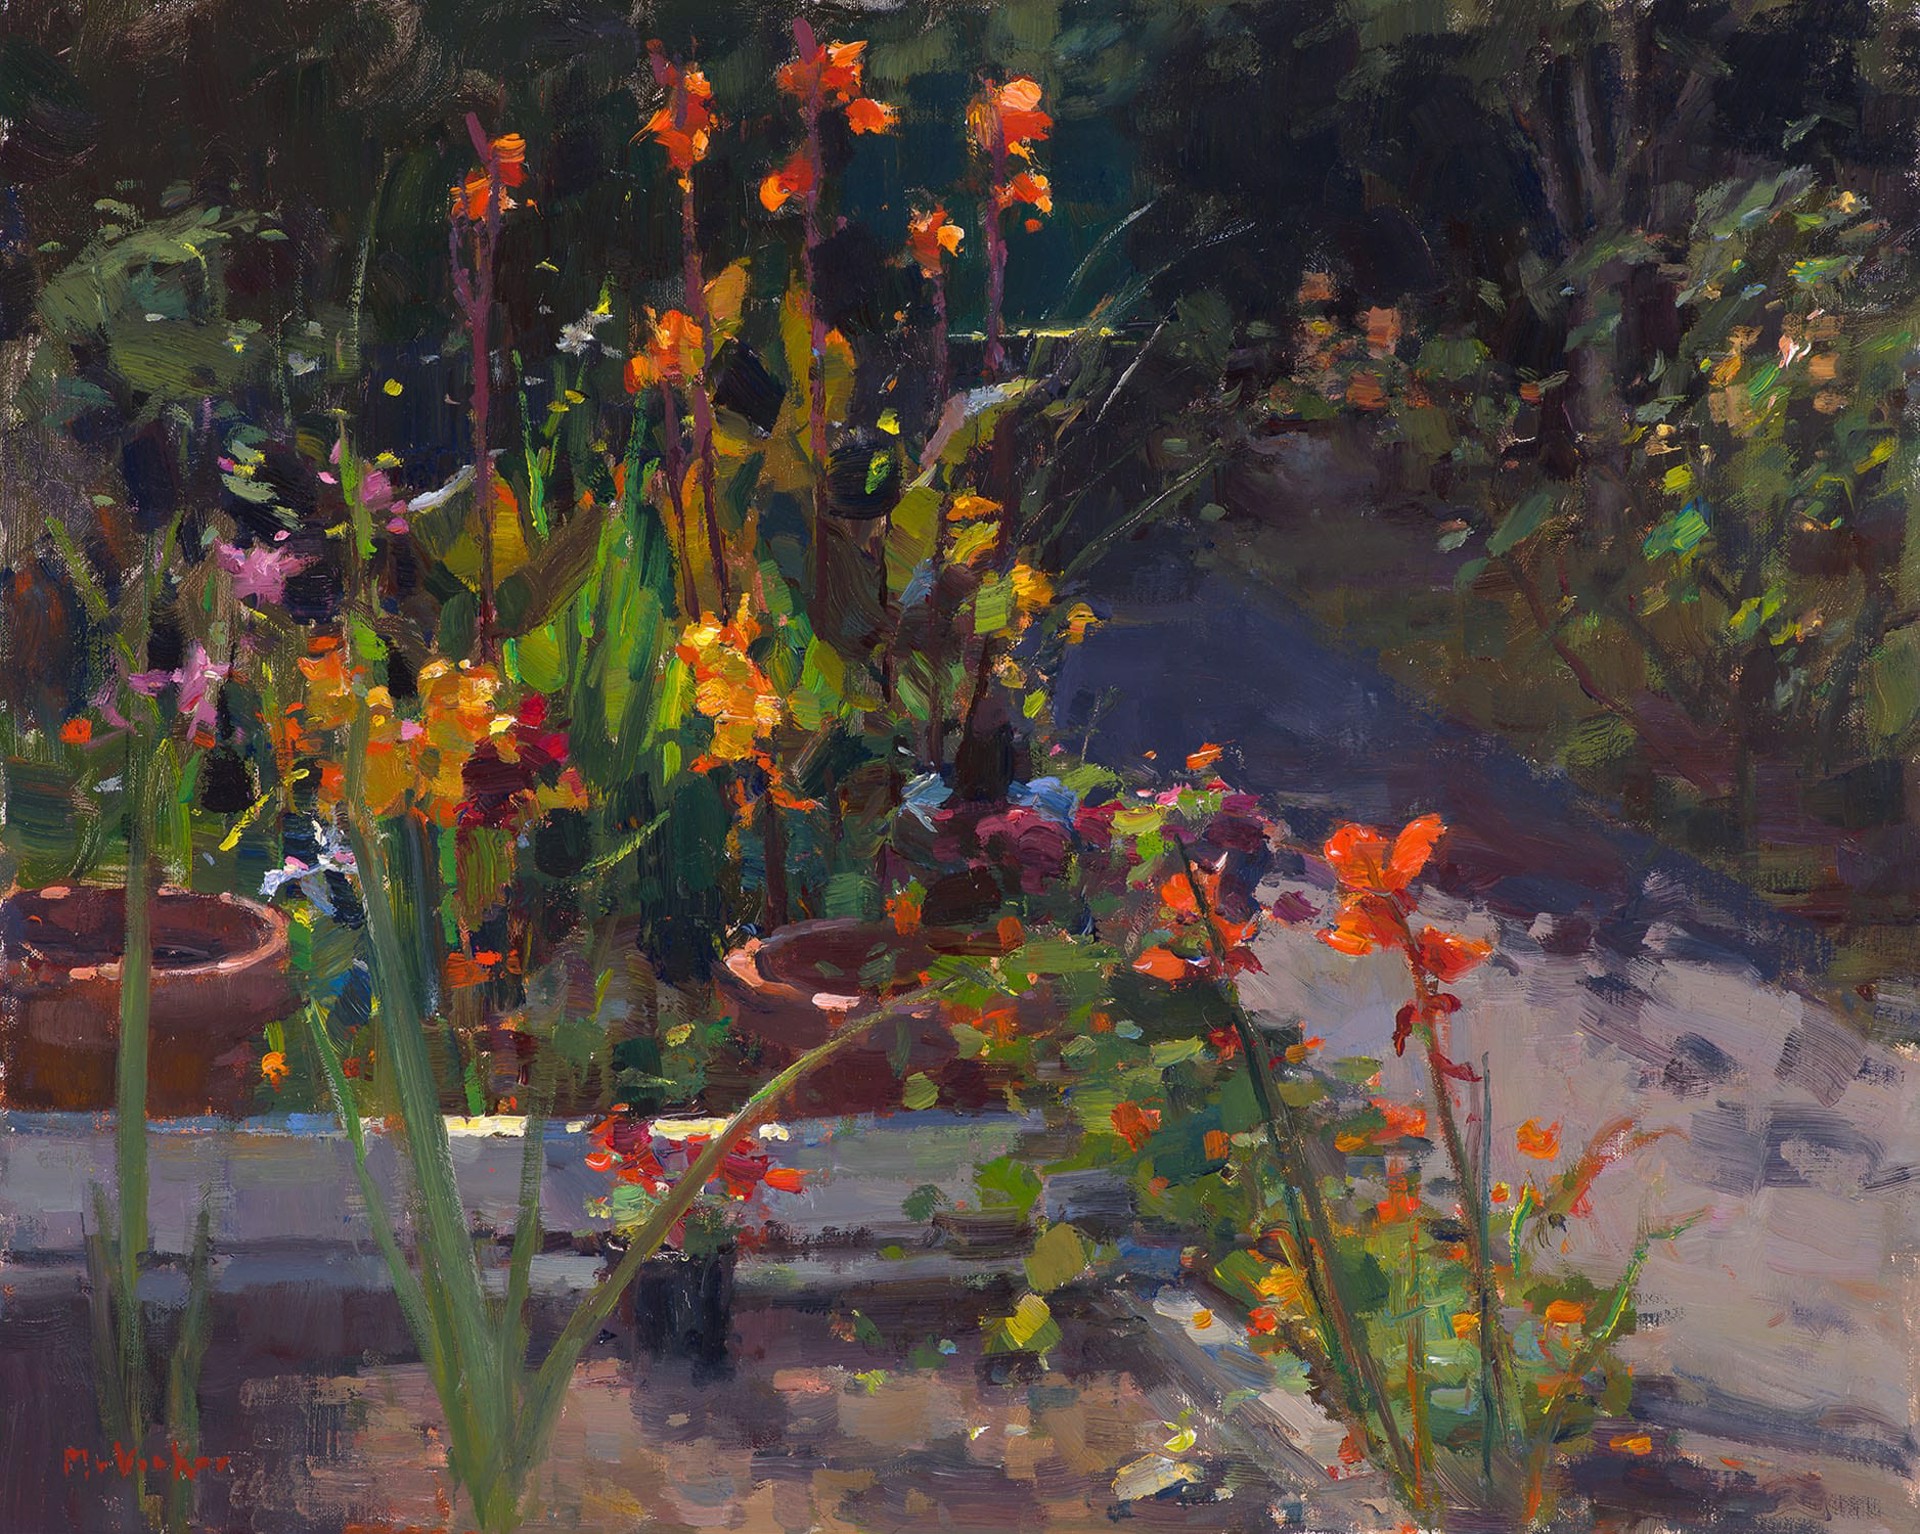 Garden, Light and Color by Jim McVicker